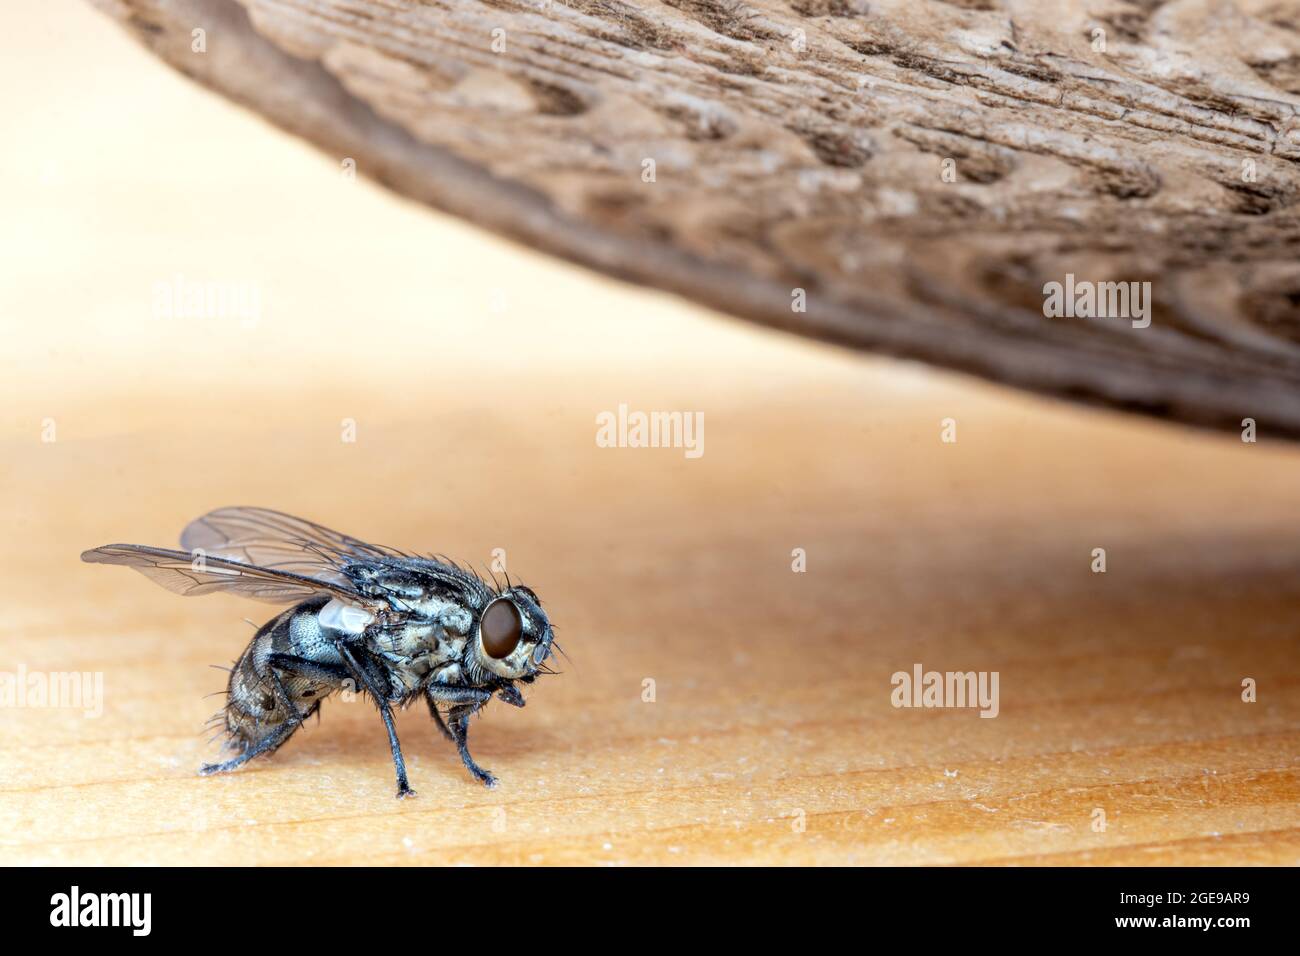 The fly sits on the floor, under the falling sole of the slippers Stock Photo